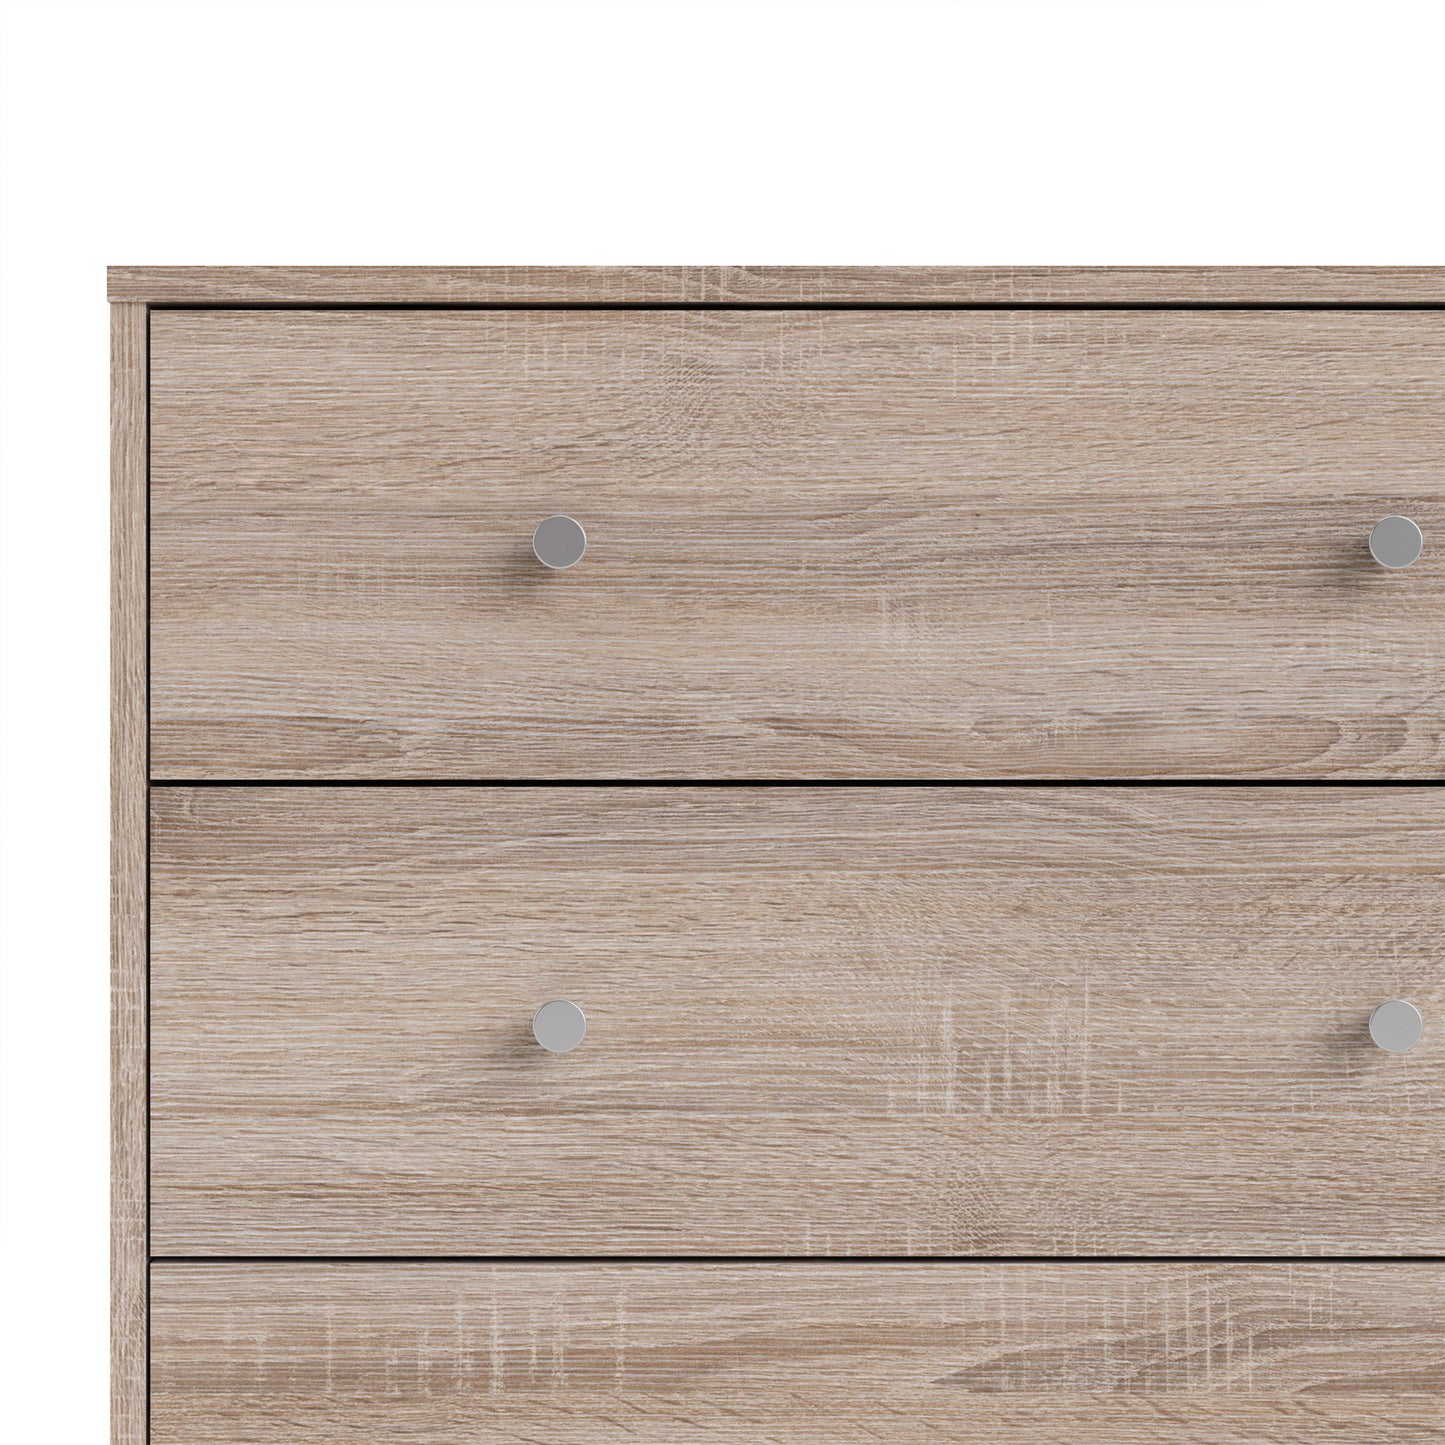 May  Chest of 3 Drawers in Truffle Oak